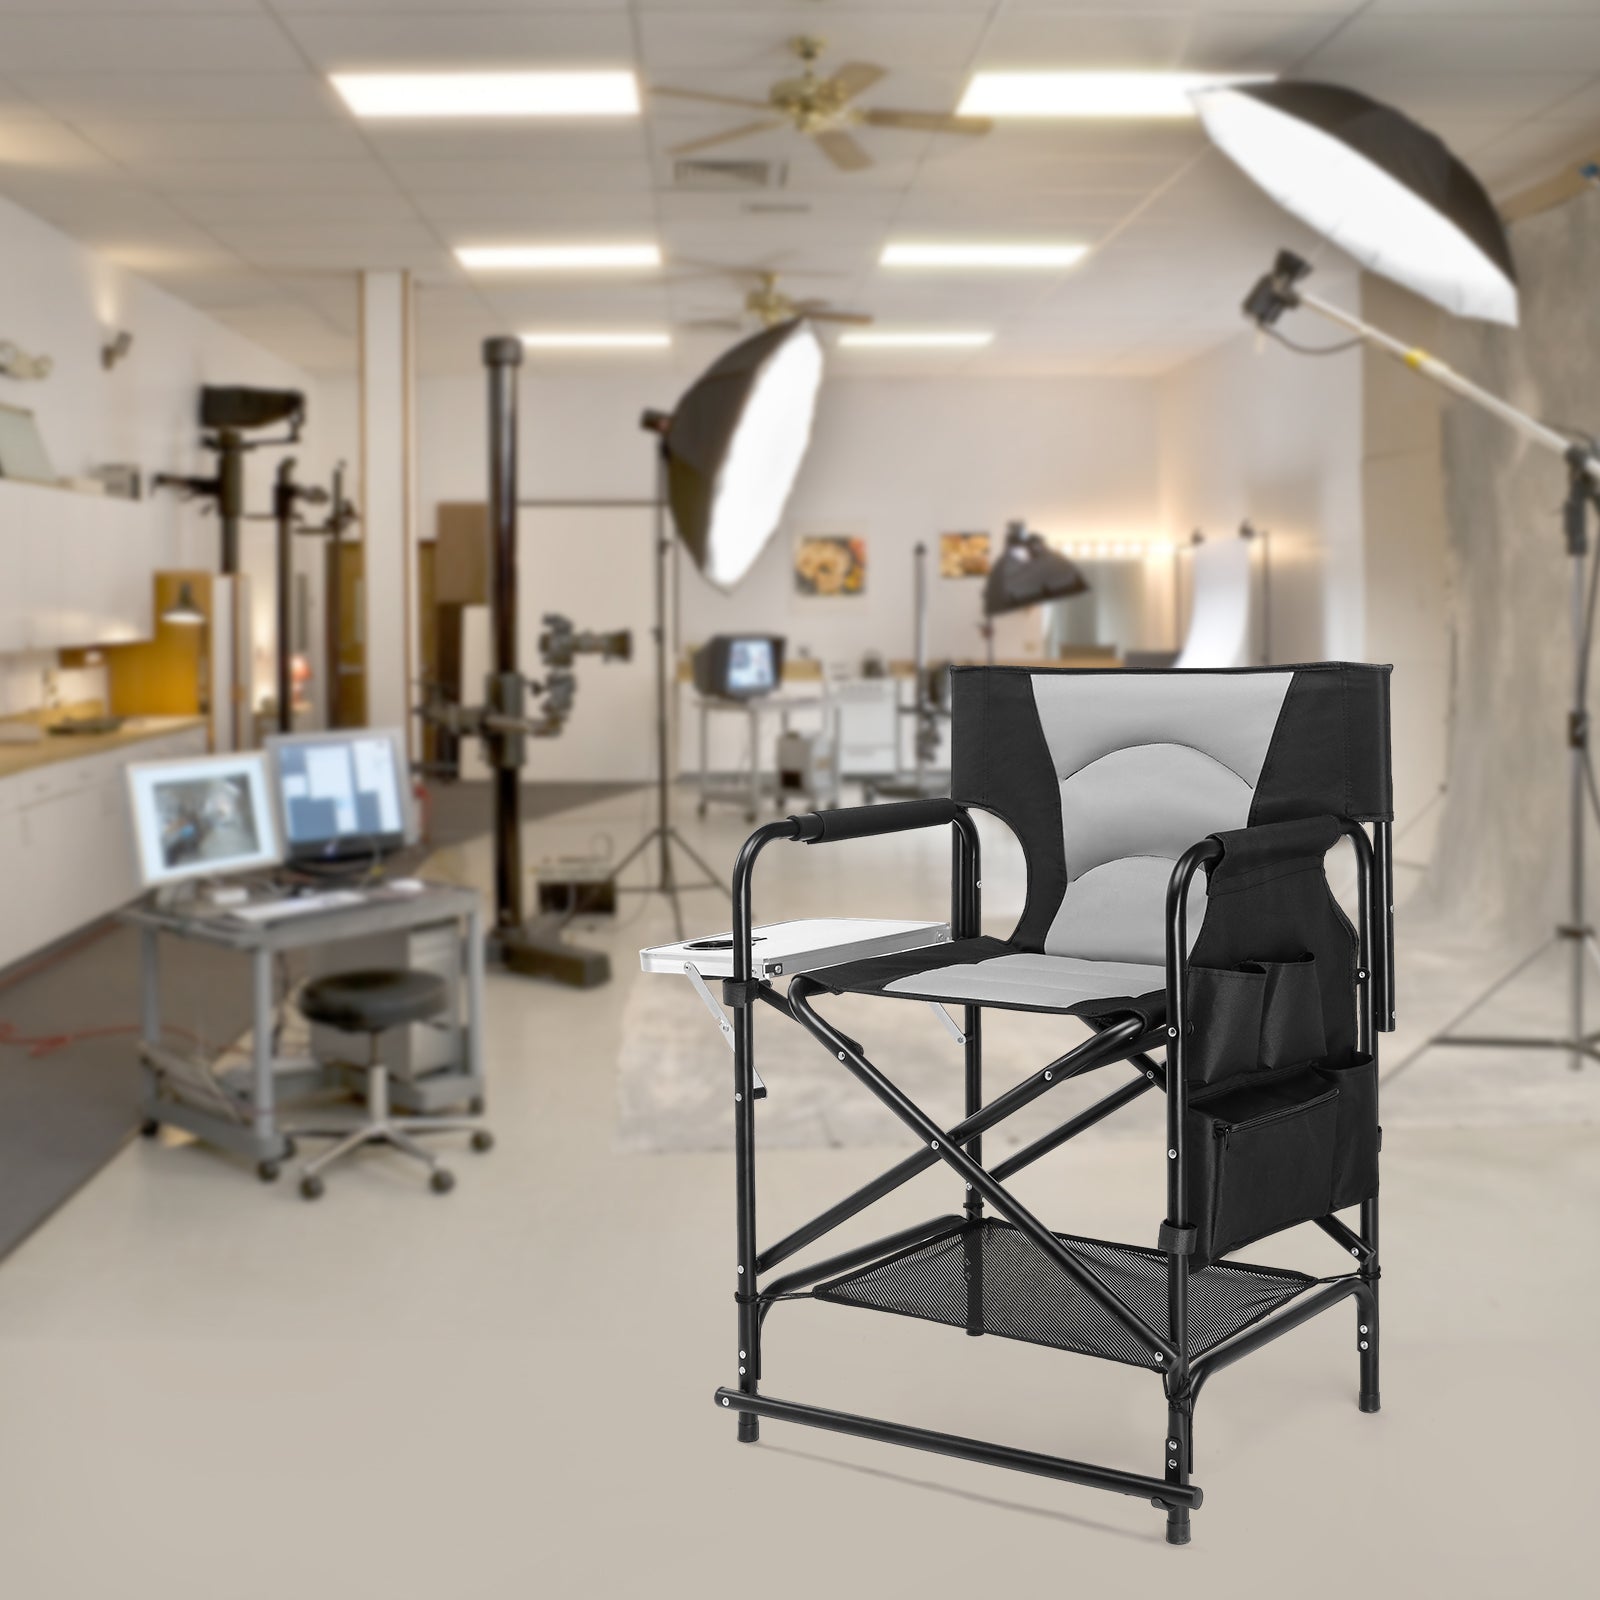 OmySalon 22in Directors Chair Portable Folding Makeup Artist Chair with Side Table